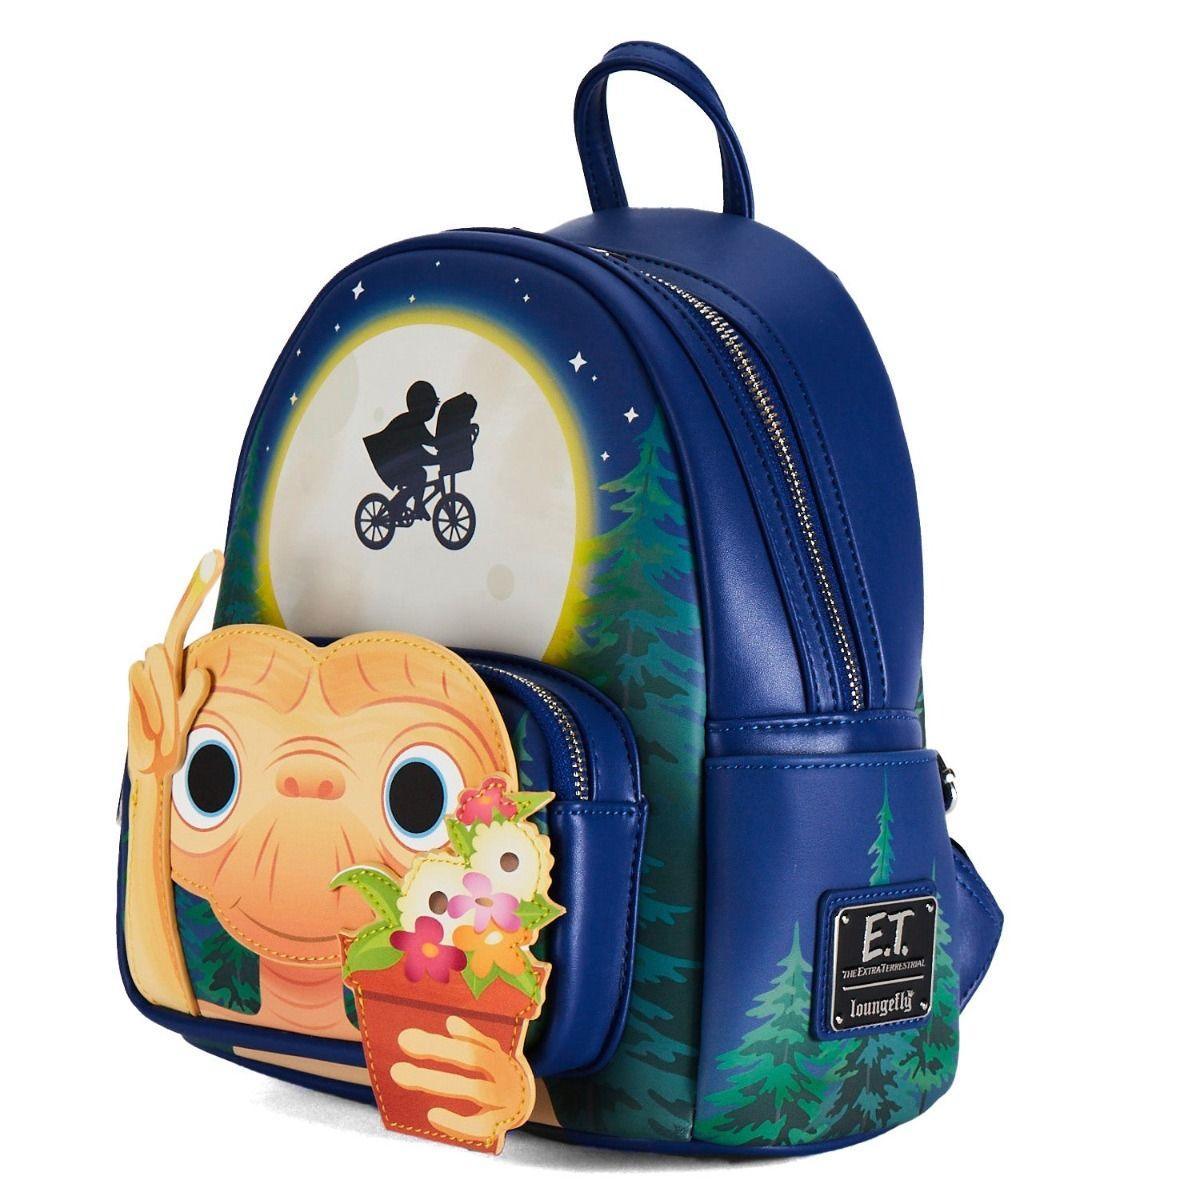 LOUETBK0001 E.T. the Extraterrestrial - Ill Be Right Here Mini Backpack - Loungefly - Titan Pop Culture